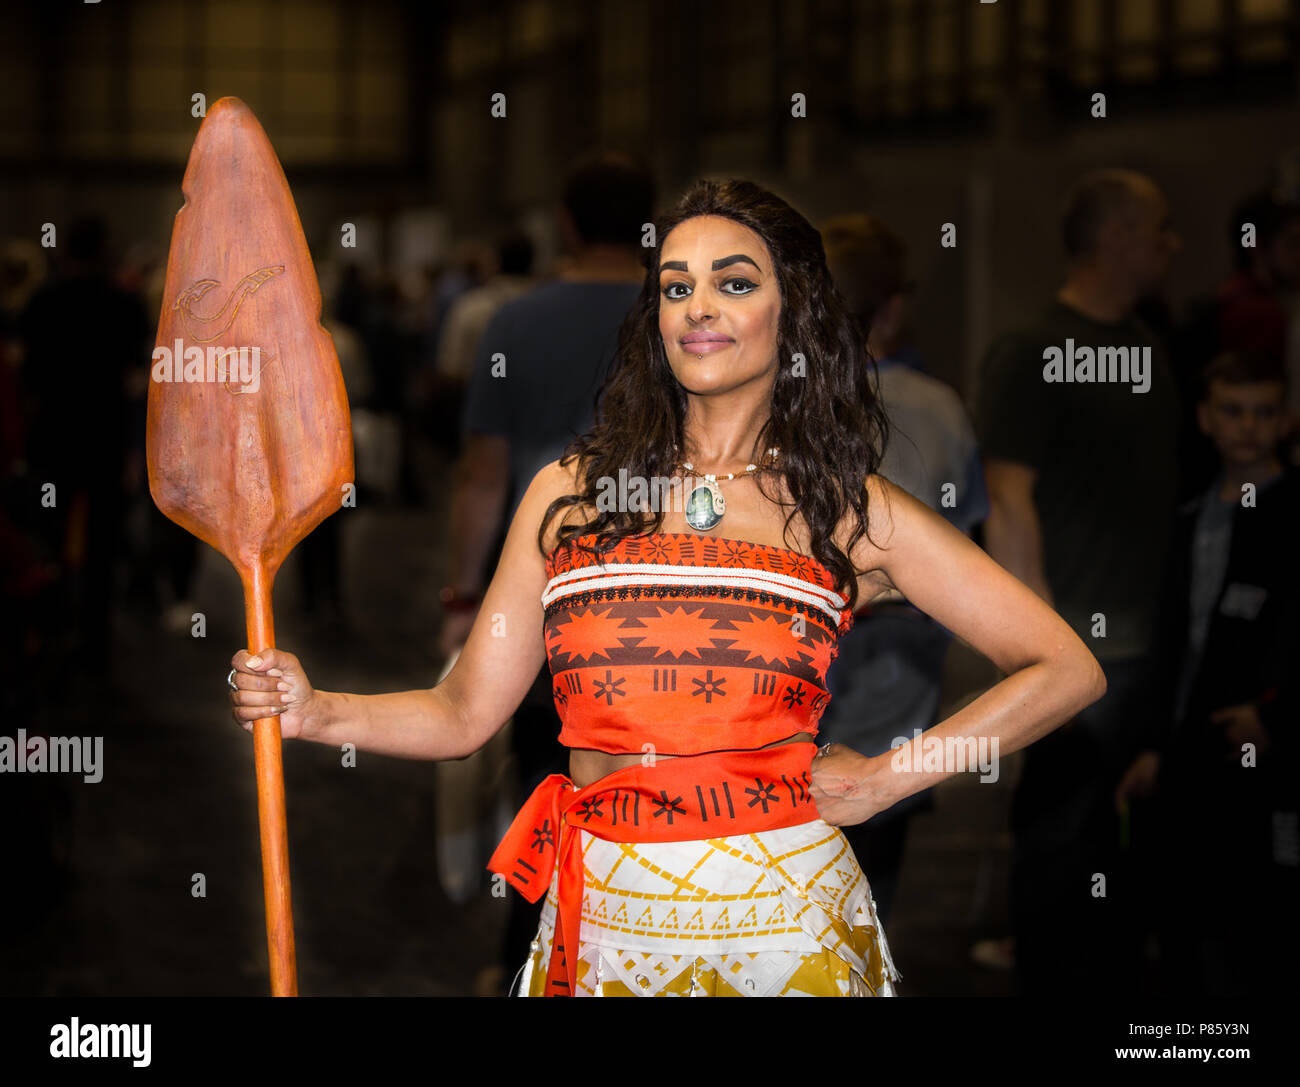 NEC, Birmingham, UK - June 2, 2018. A female cosplayer dressed as Moana from the Disney movie Stock Photo